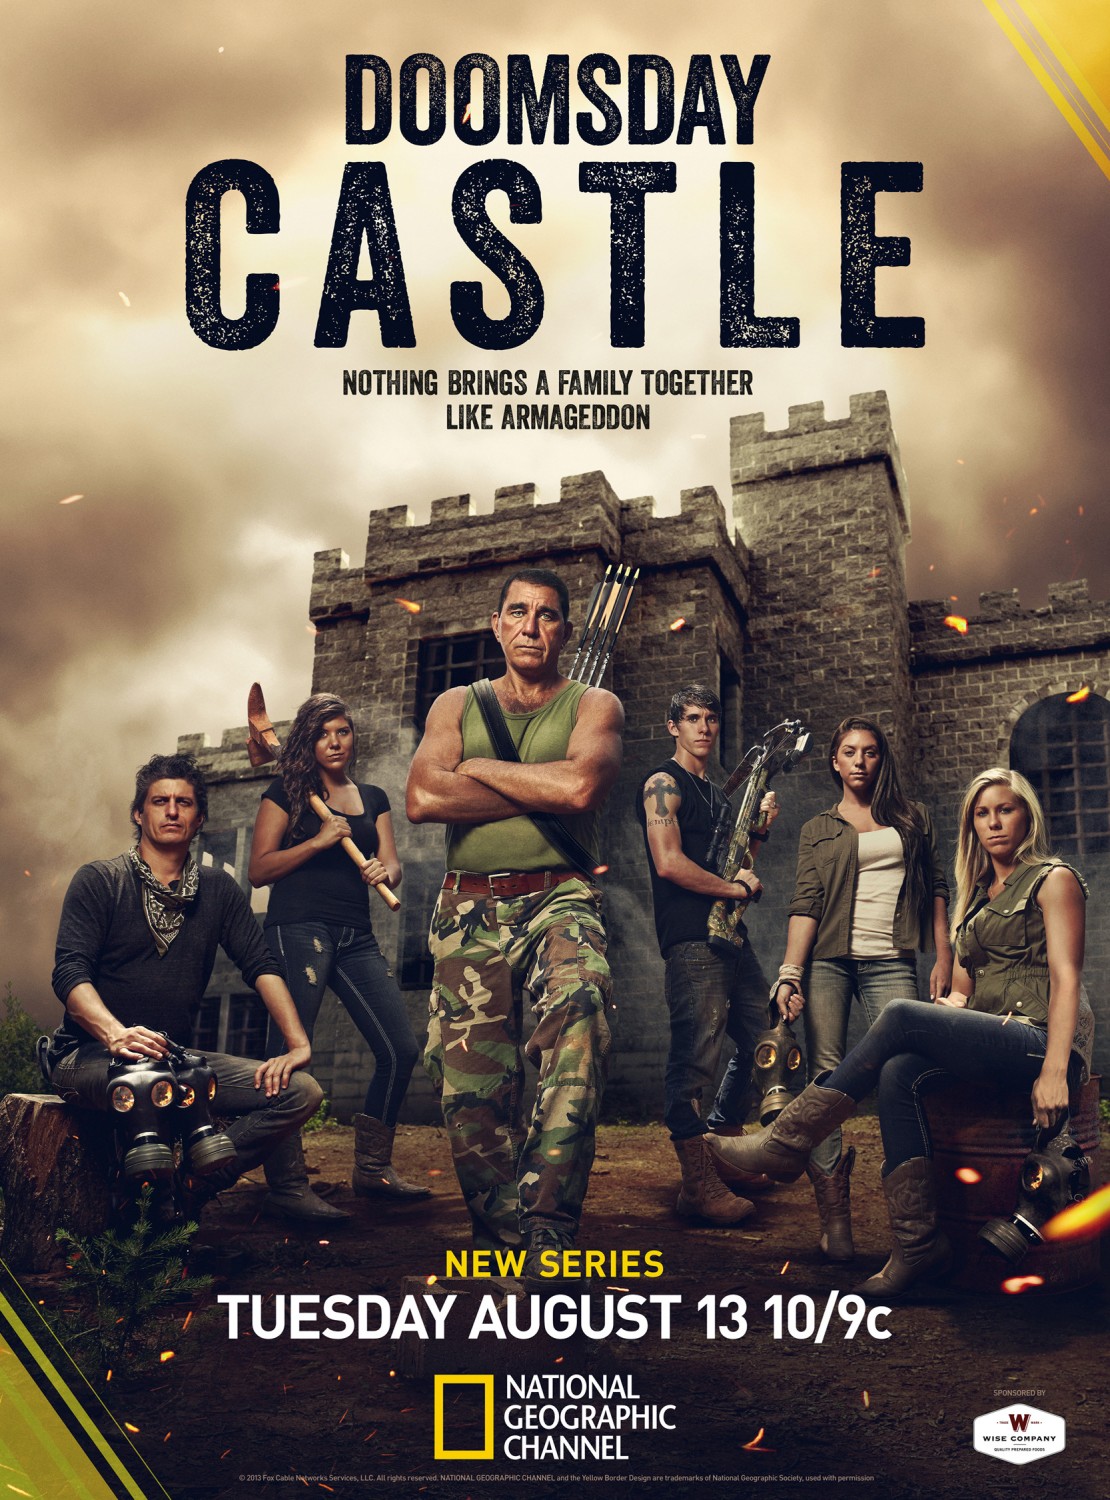 Extra Large TV Poster Image for Doomsday Castle 